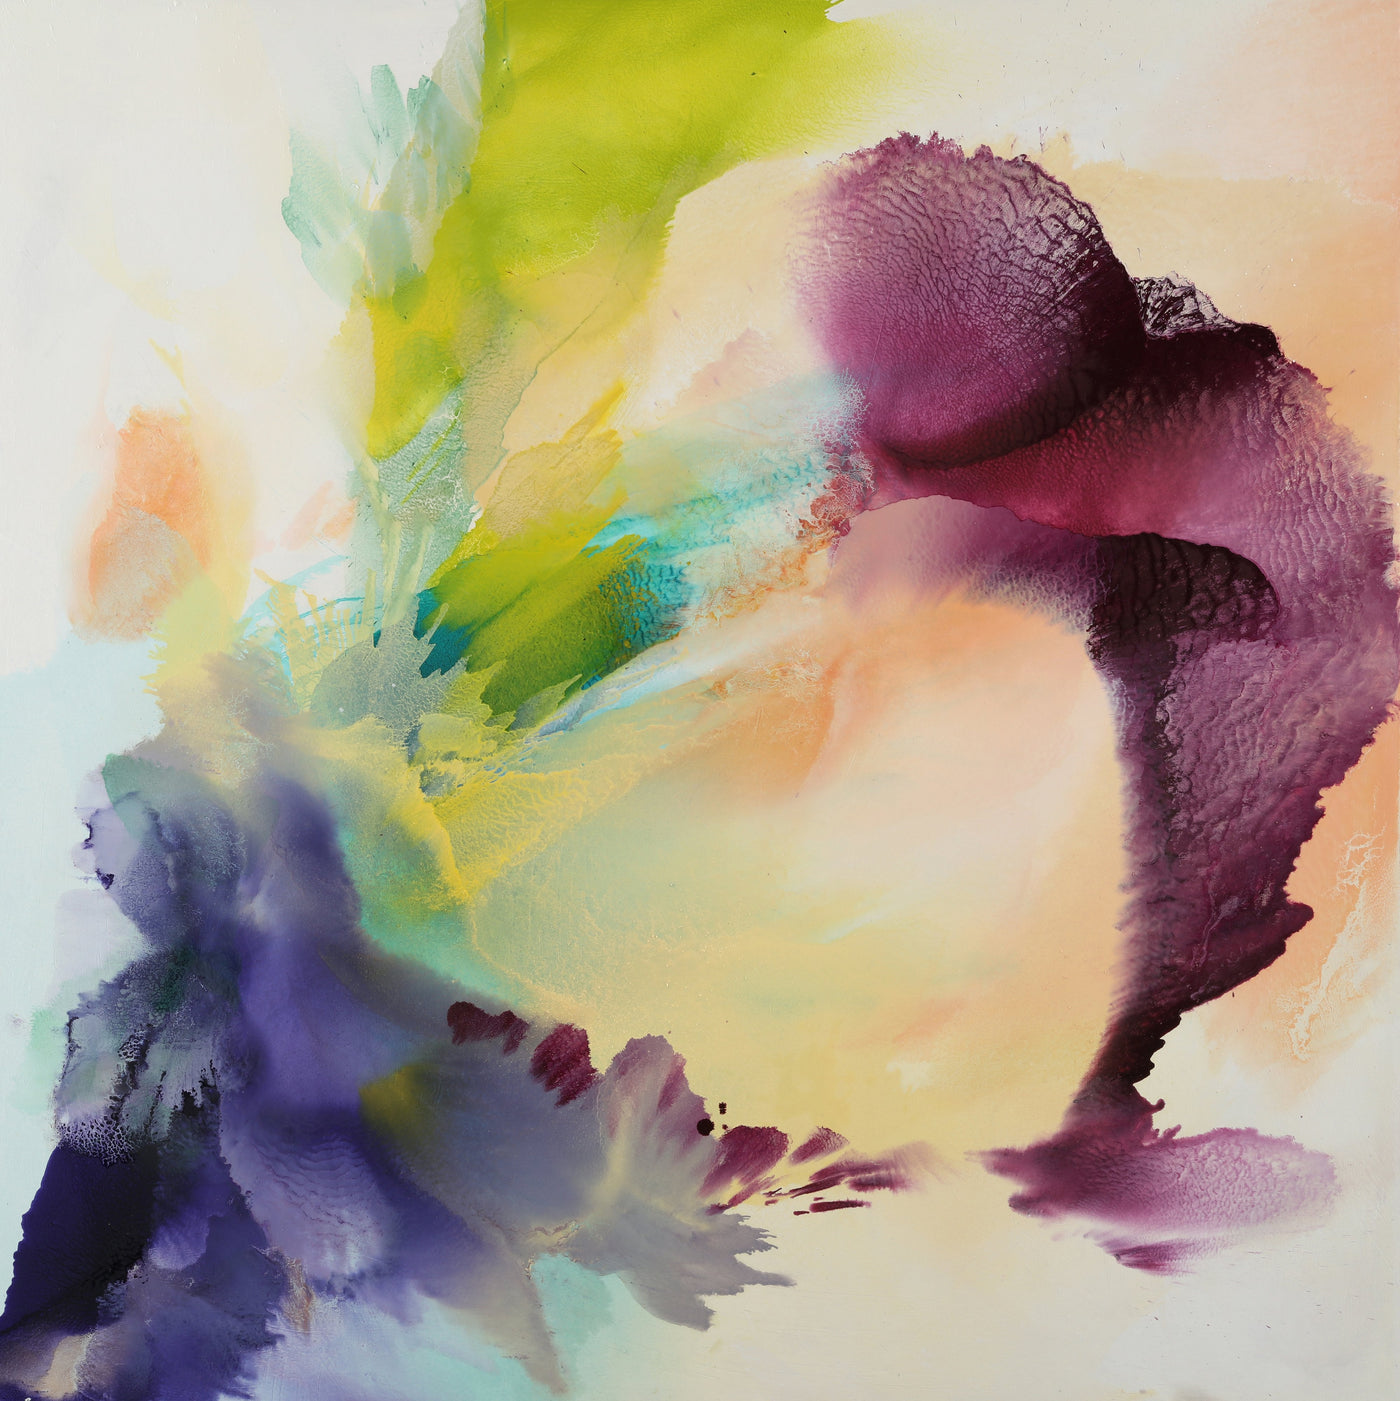 Usha Shukla's abstract painting "Take a Breath" is available at Voss Gallery, San Francisco for $3,000.